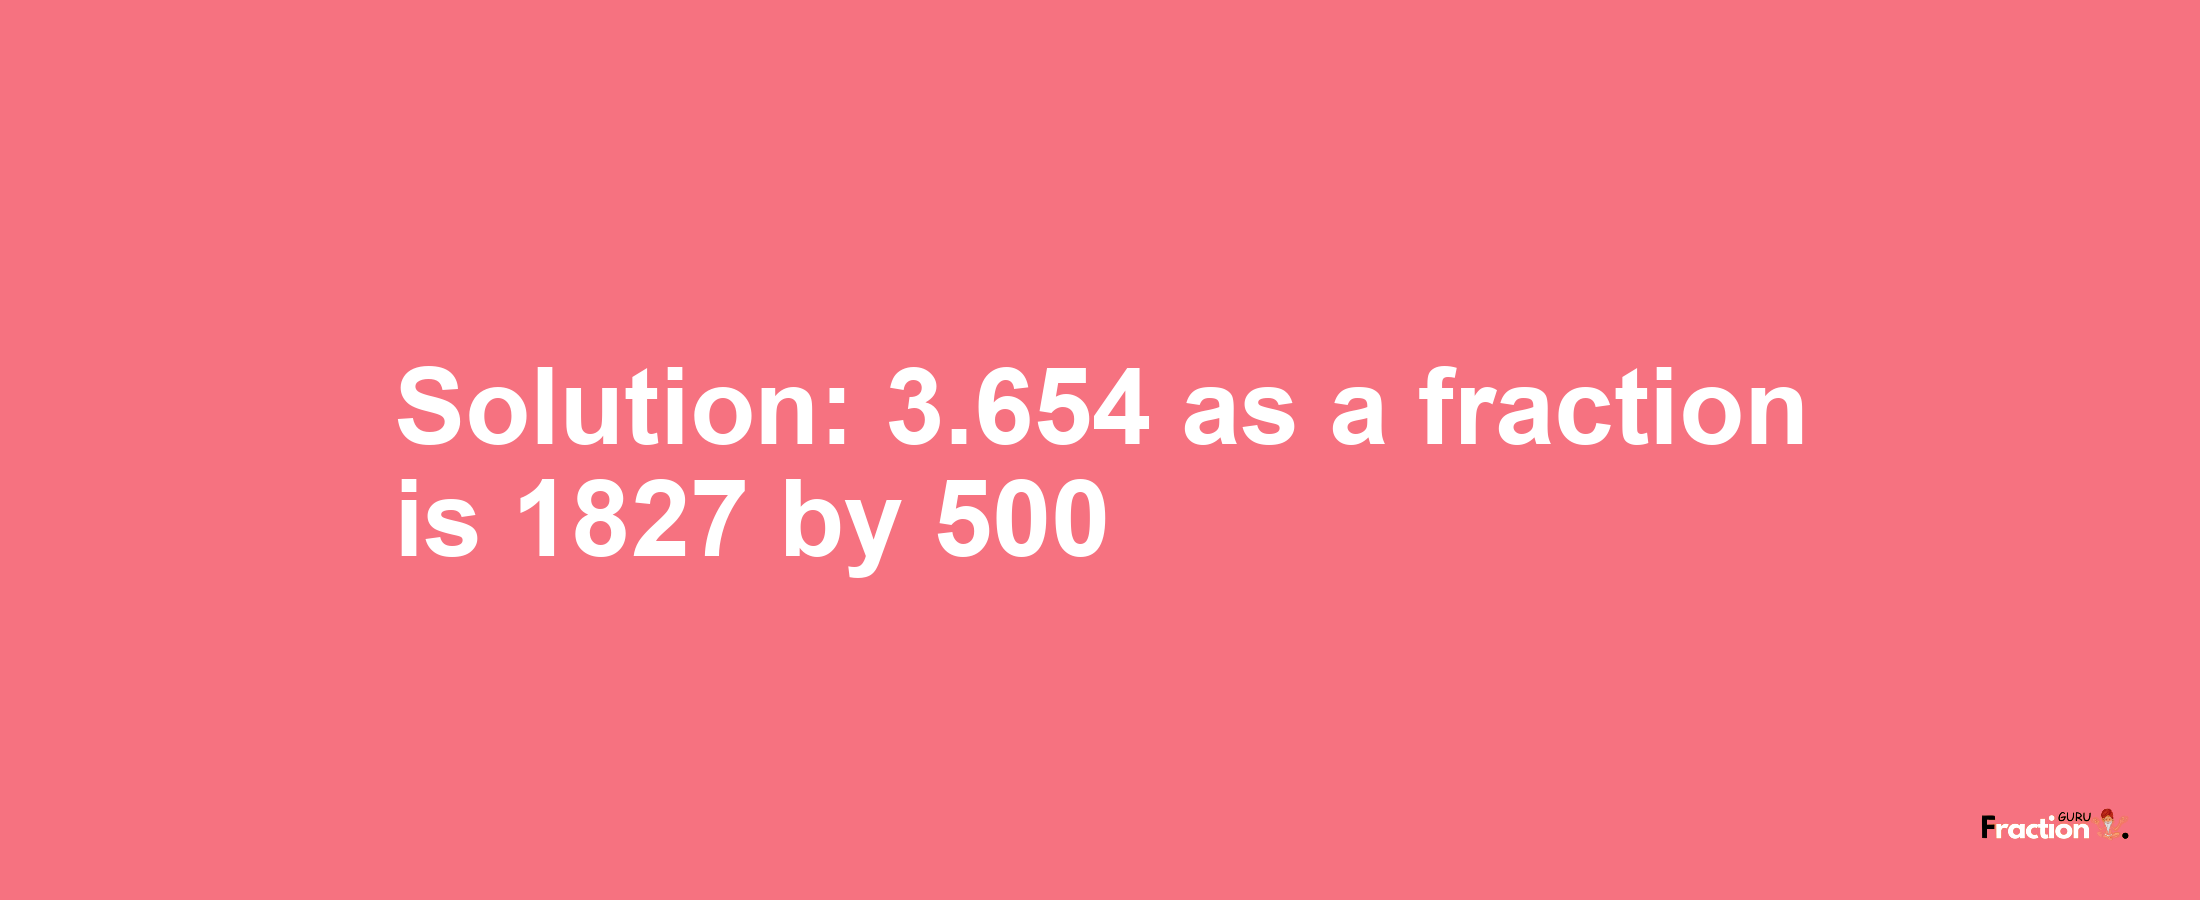 Solution:3.654 as a fraction is 1827/500